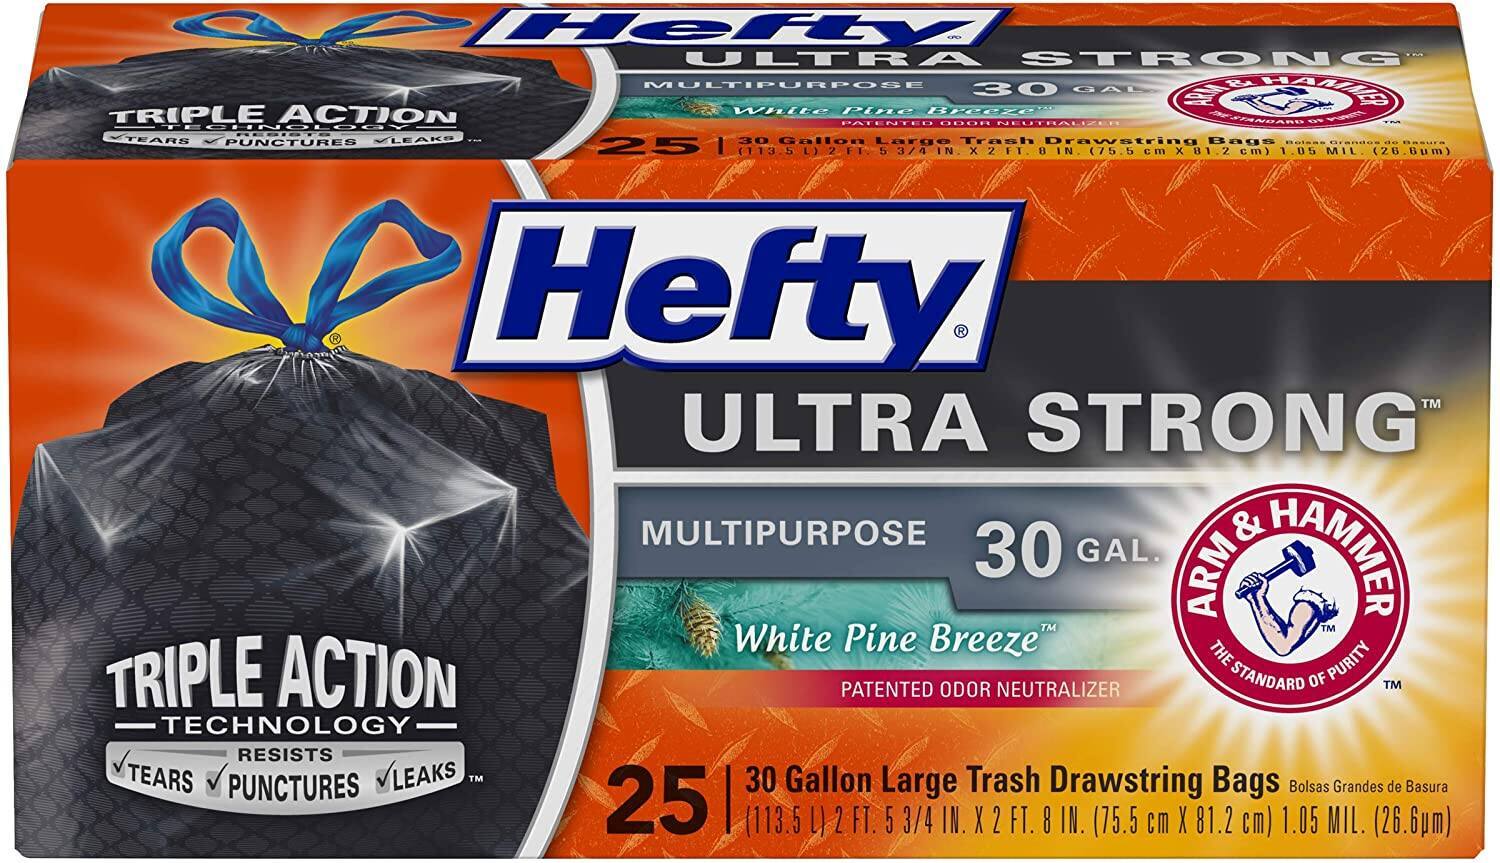 25-Ct 30-Gallon Hefty Ultra Strong Large Trash Bags (White Pine Breeze) $4.63 w/ S&S + Free Shipping w/ Prime or on $25+